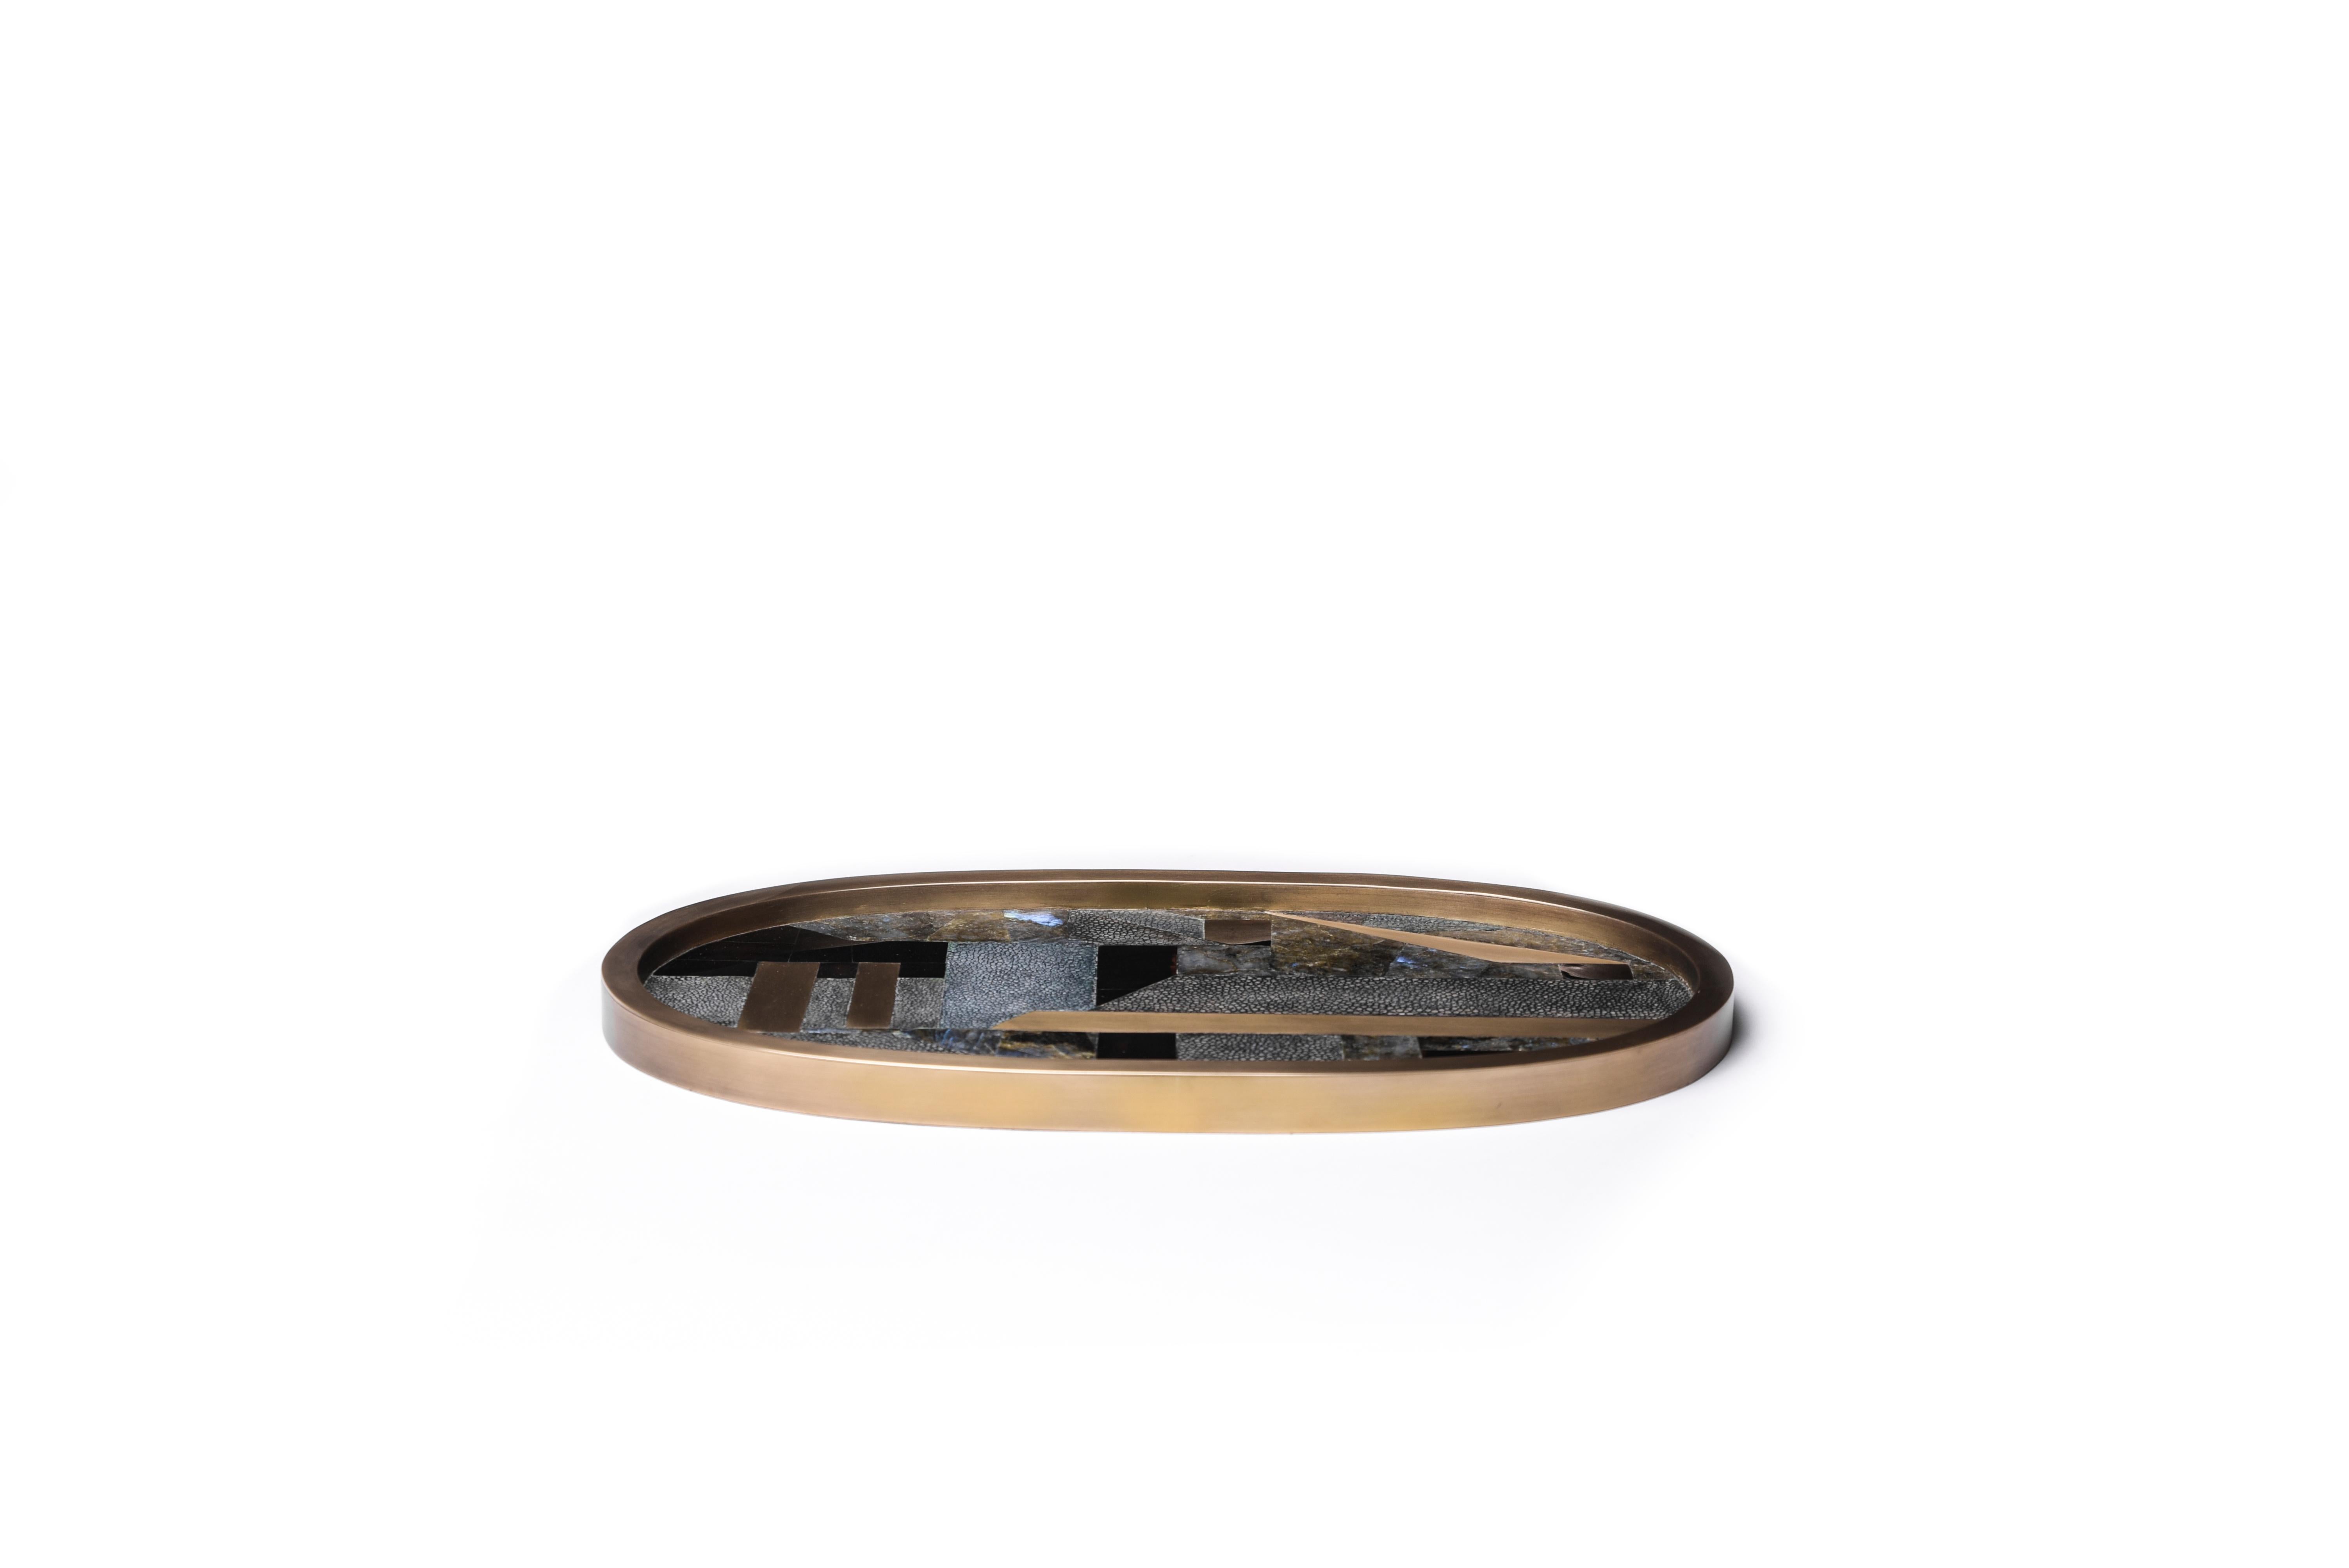 Oval Tray inlaid in Blue Shell and Brass by Kifu, Paris 5